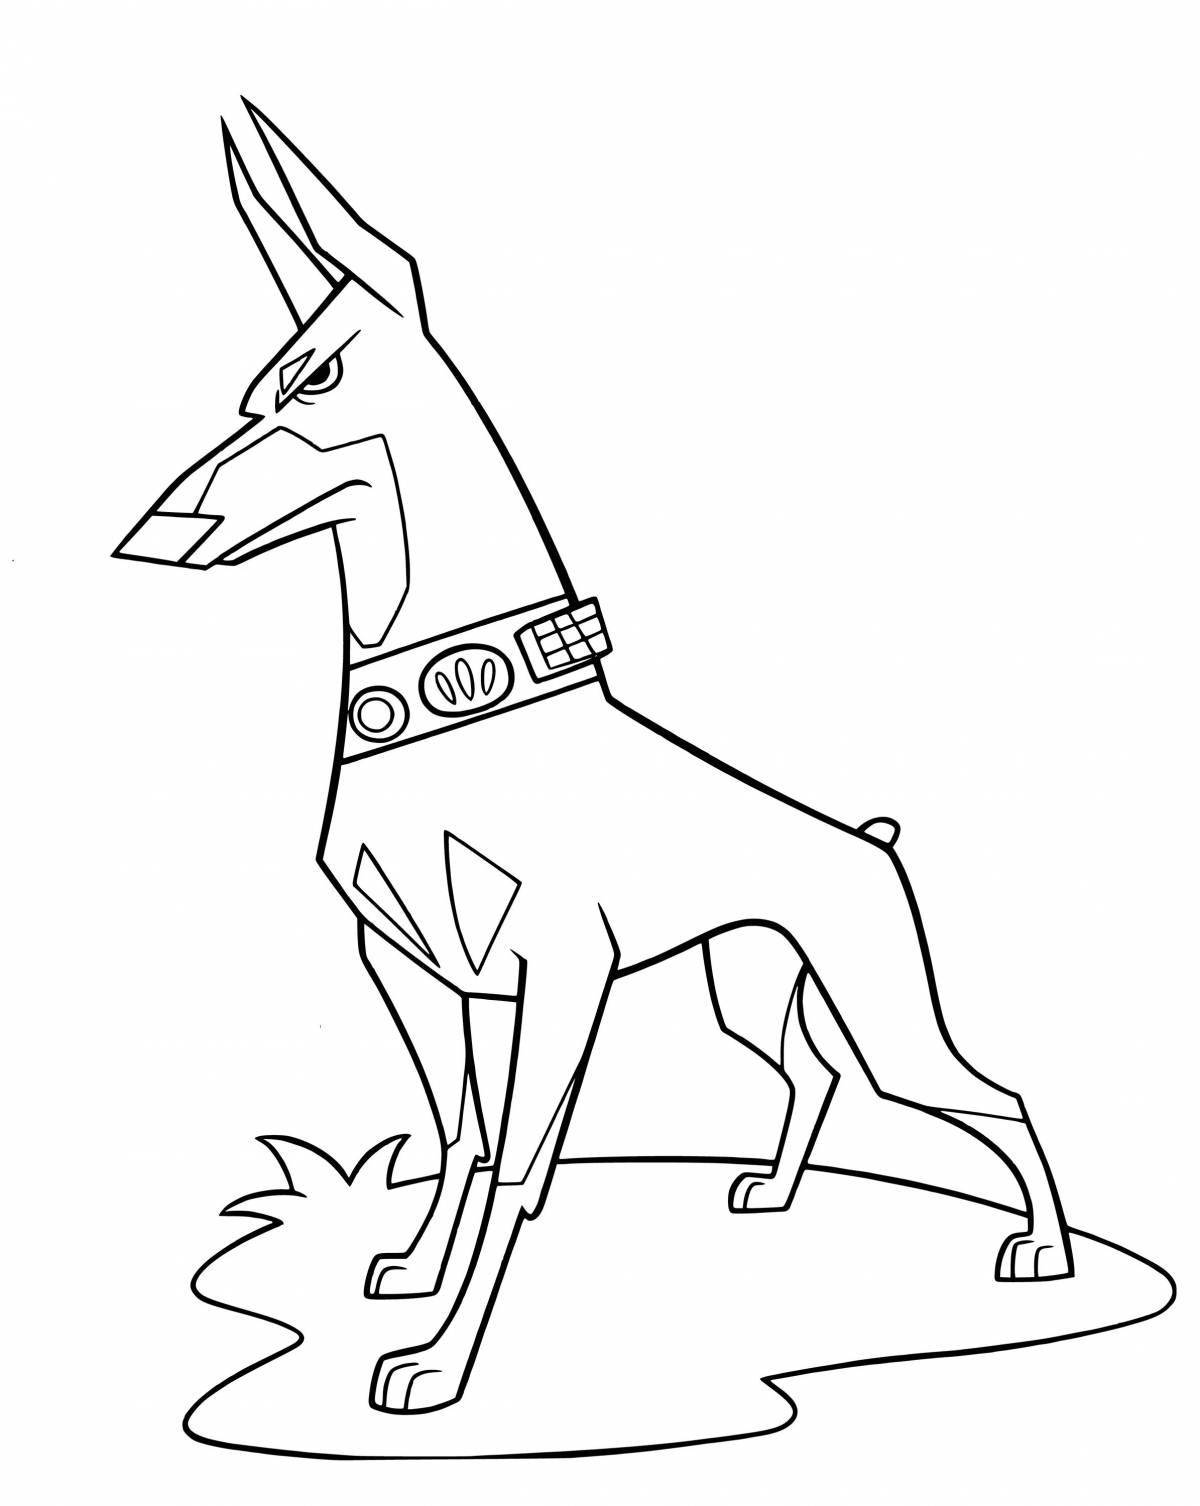 Dashing miniature pinscher coloring page